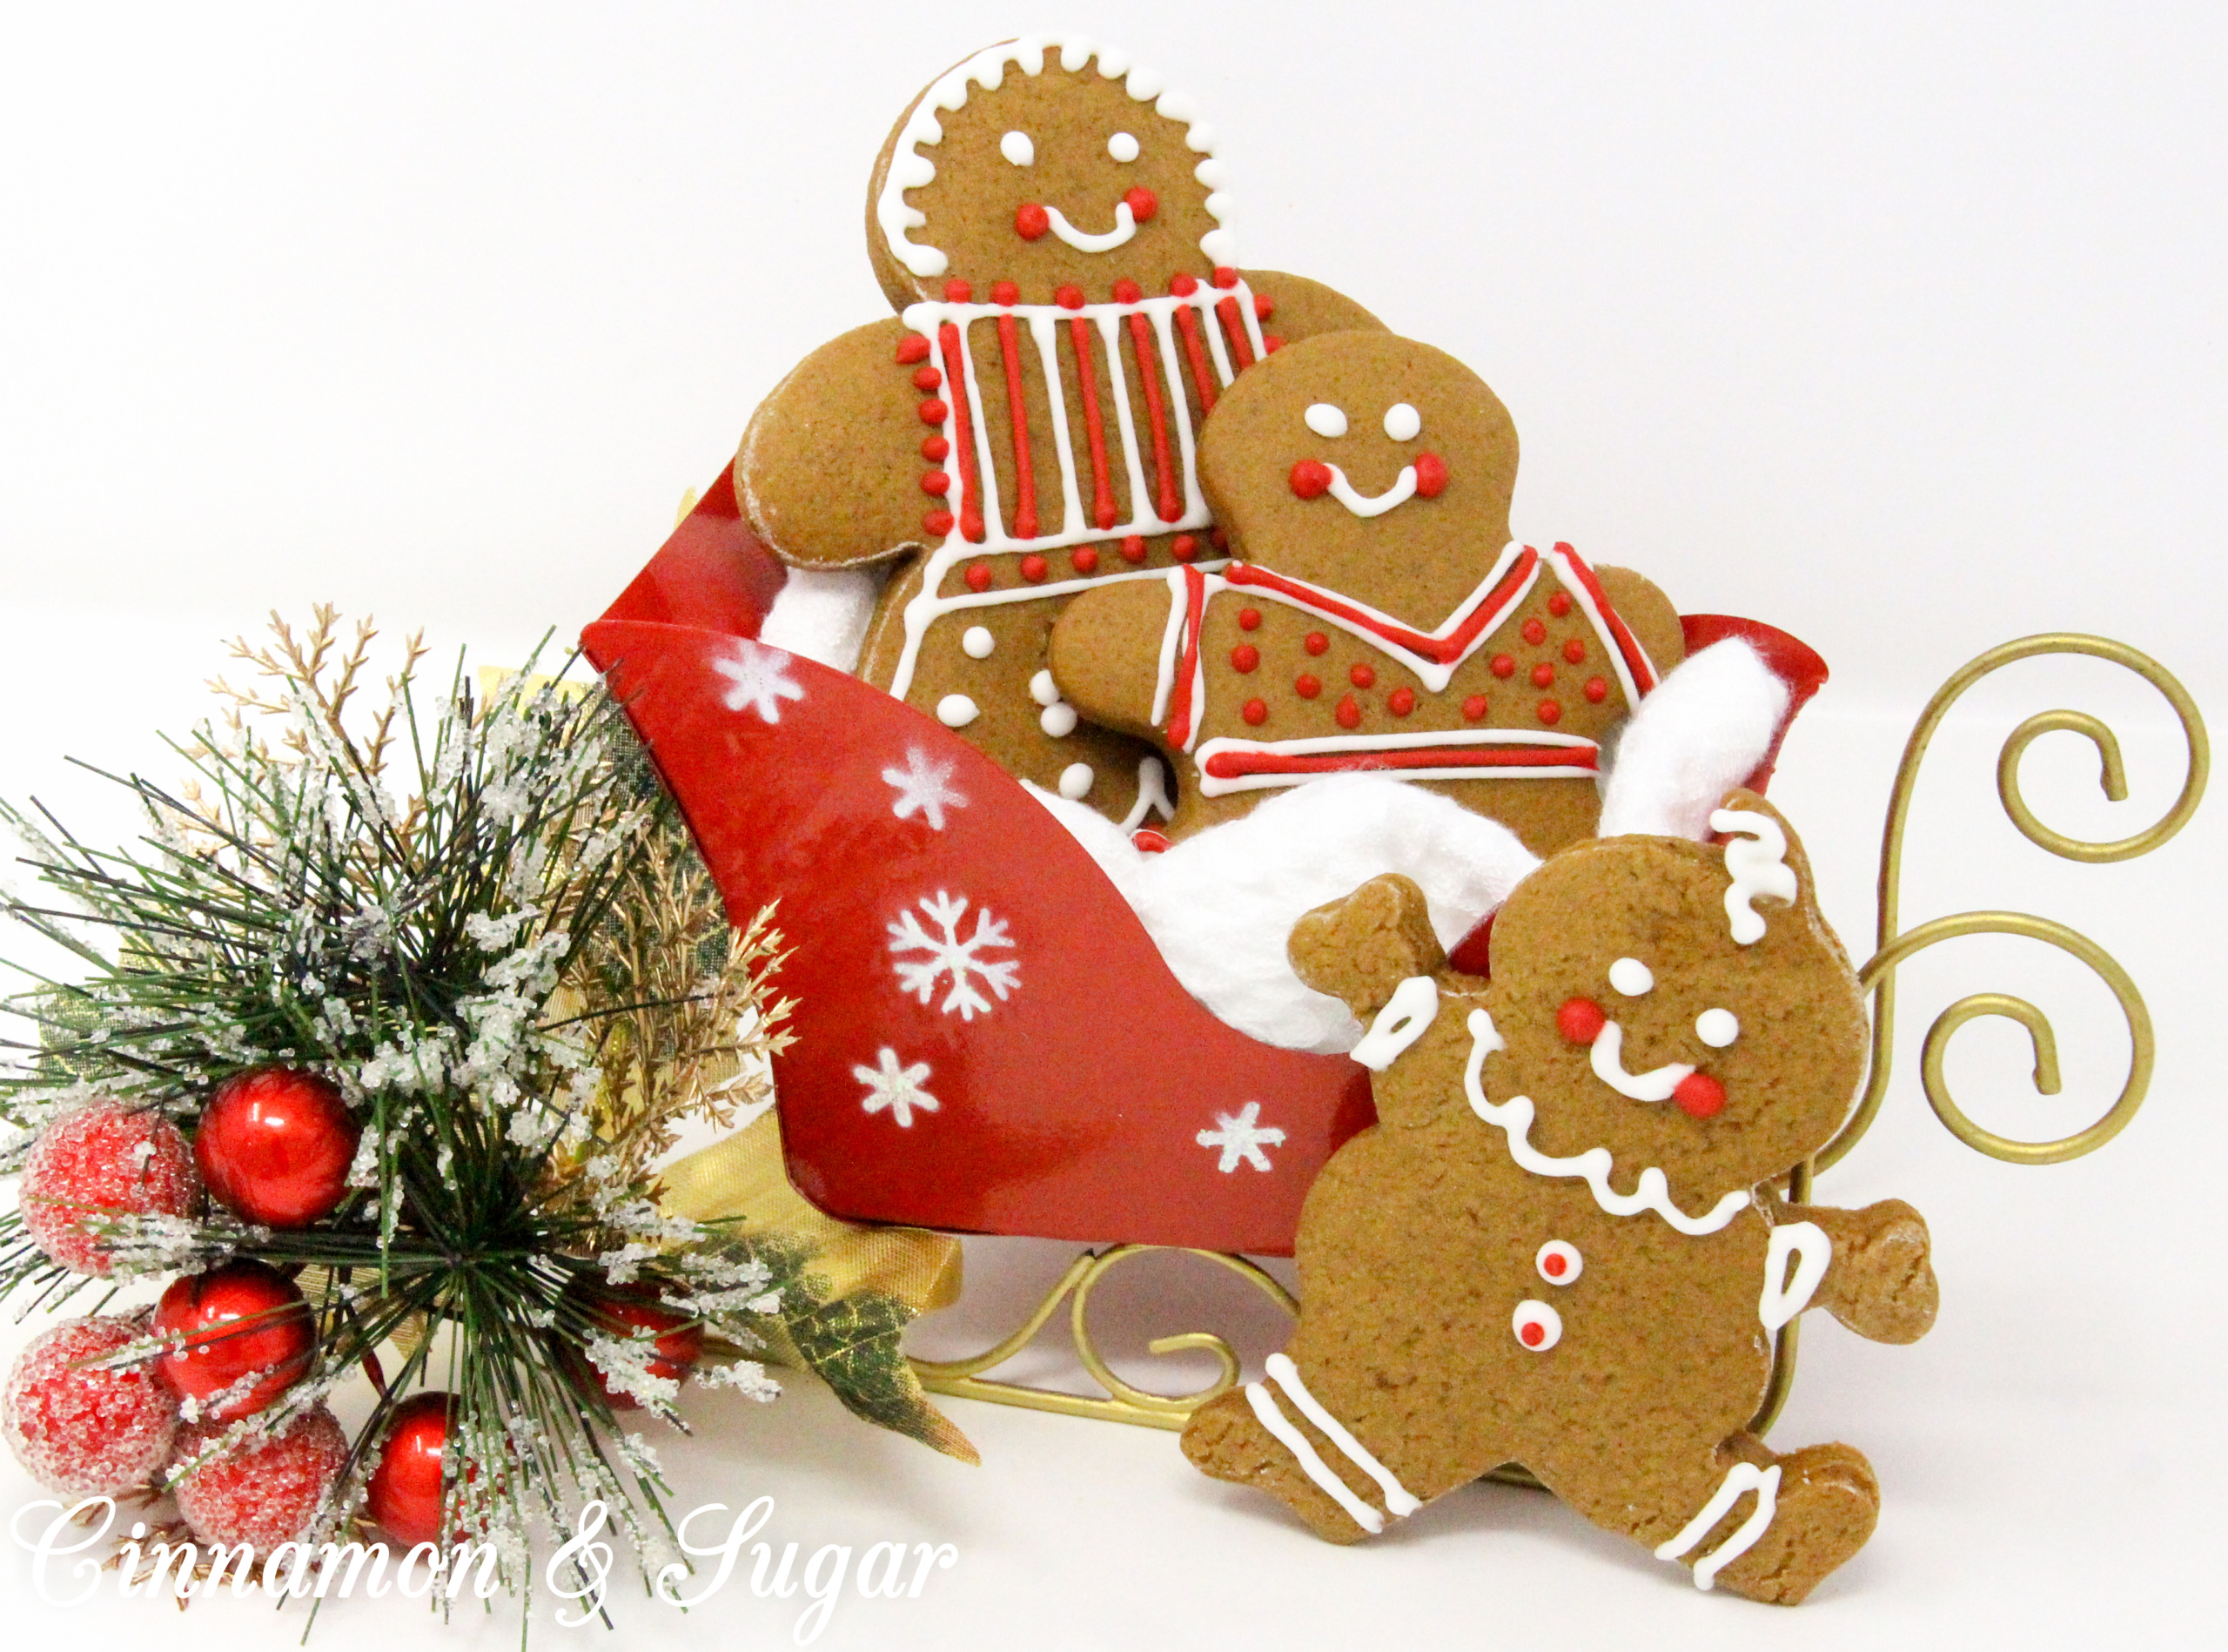 Gingerbread People are sweet, spiced cutout cookies that remain soft instead of overly crunchy. While gingerbread cookies are associated with Christmas, these yummy cookies are delicious anytime you desire a satisfying spiced cookie! Recipe shared with permission granted by Maddie Day, author of CANDY SLAIN MURDER.